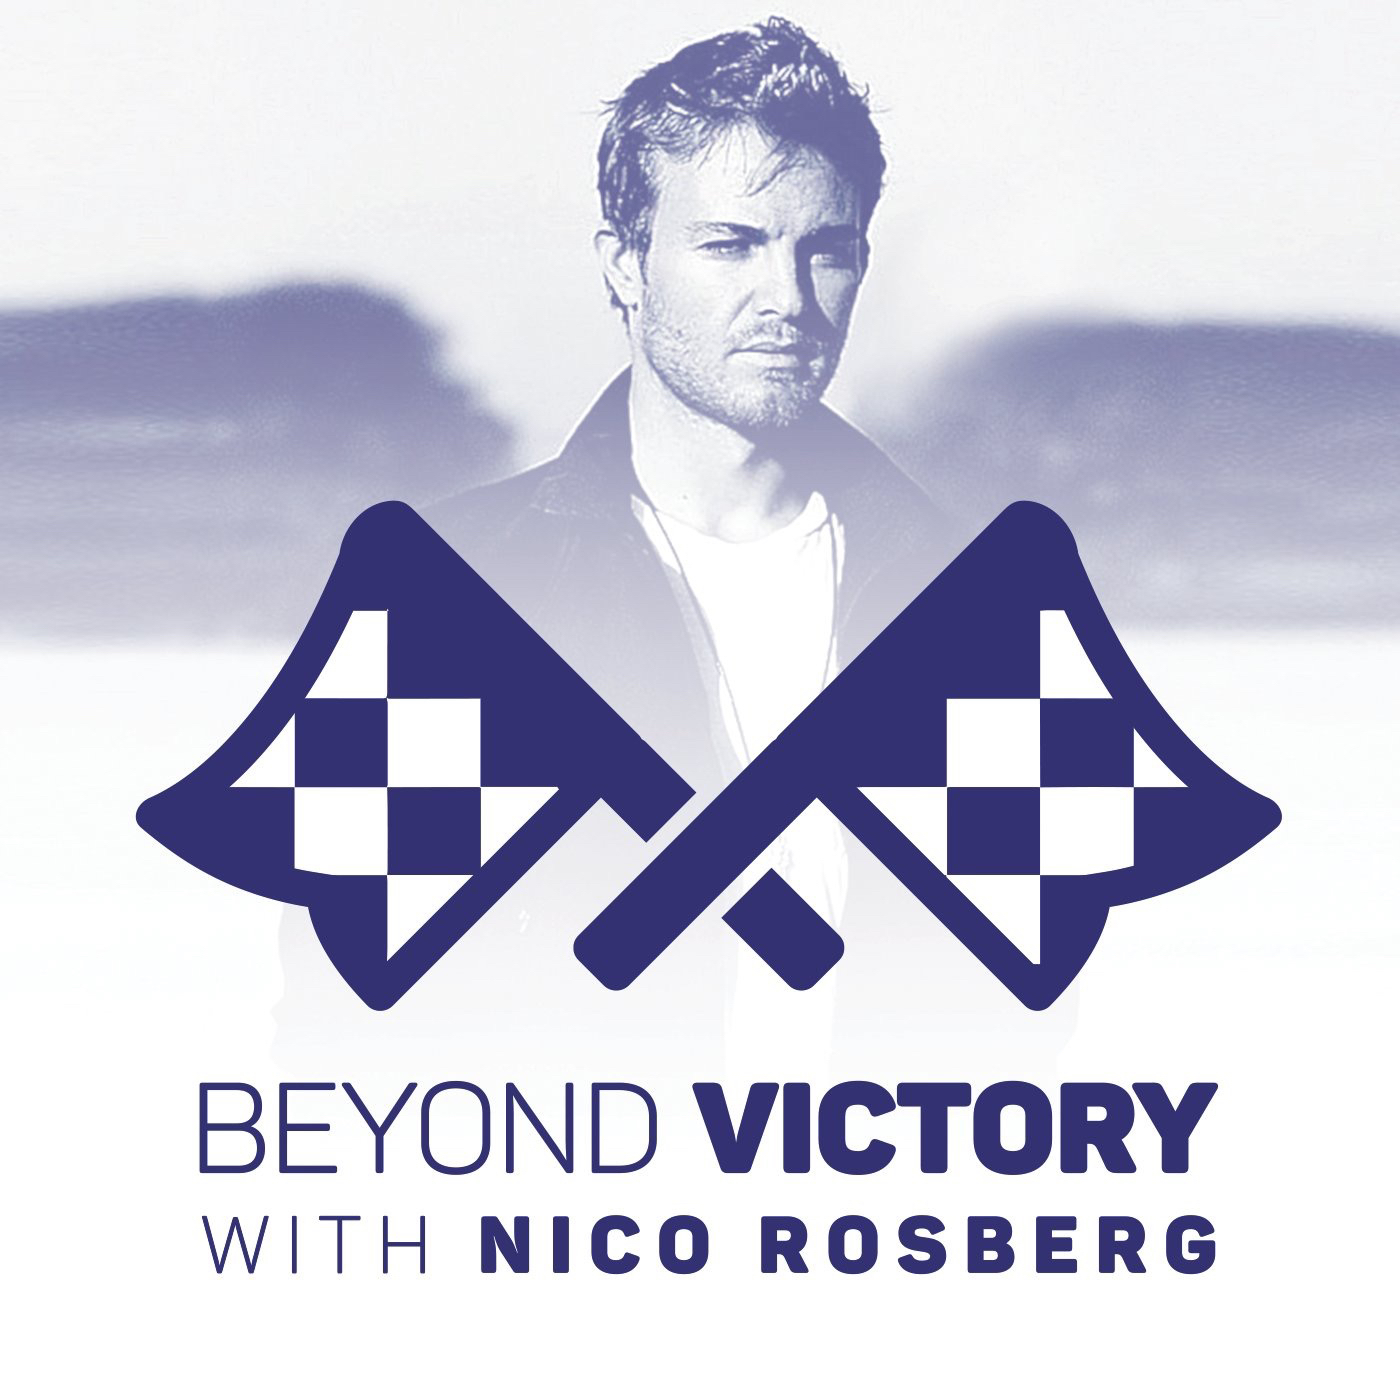 Learnings from Michael Schumacher with Flavio Briatore - Episode 3